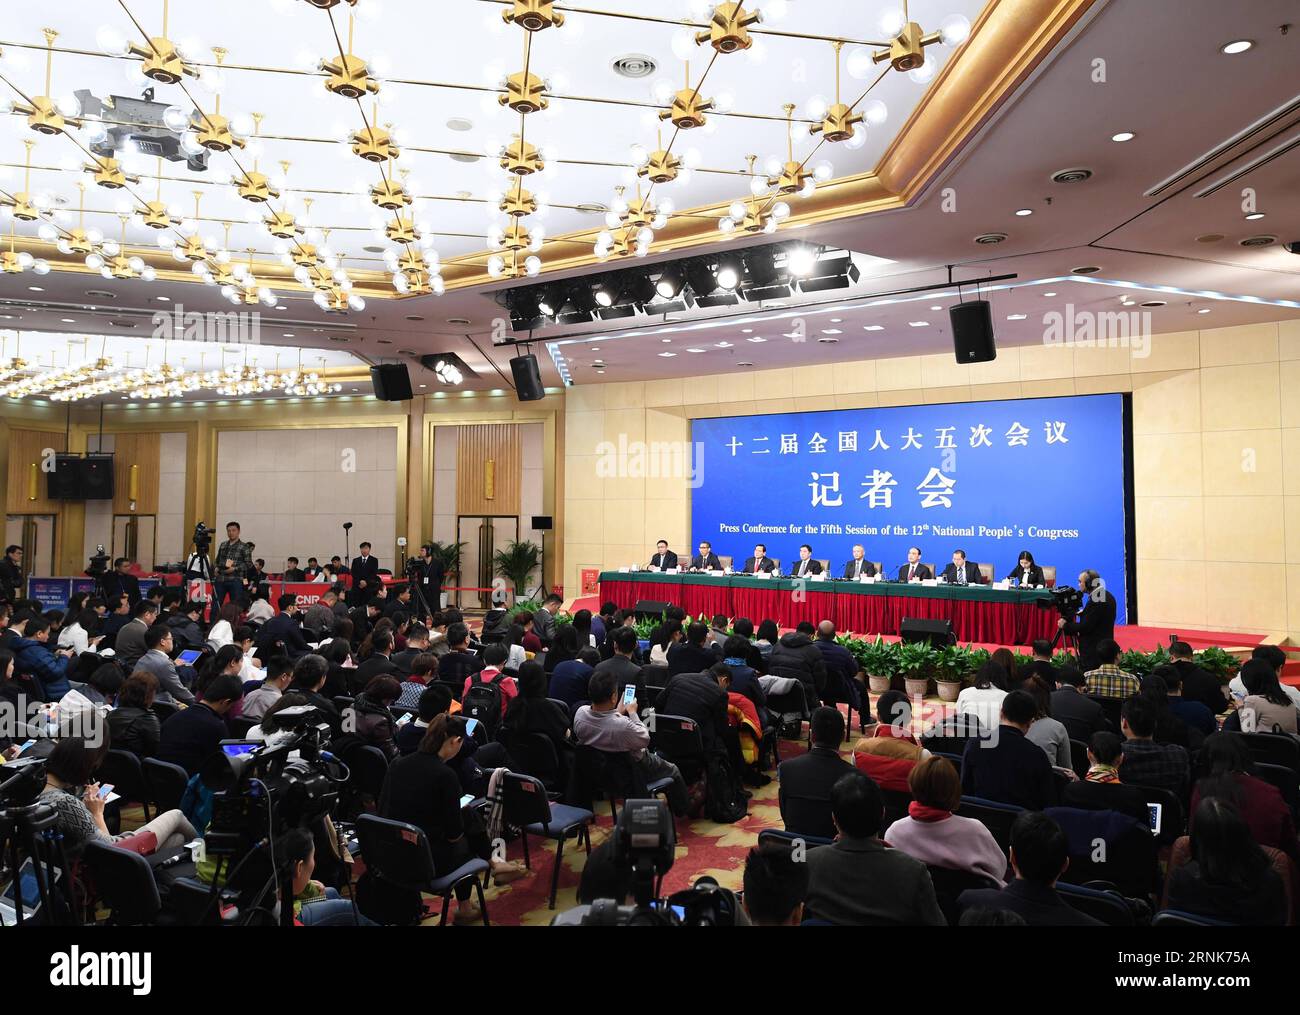 (170310) -- BEIJING, March 10, 2017 -- Liu Binjie, chairman of the Education, Science, Culture and Public Health Committee of the National People s Congress (NPC), Wang Shengming, vice-chairman of Internal and Judicial Affairs Committee of the NPC, Yin Zhongqing, vice-chairman of Financial and Economic Affairs Committee of the NPC, Yuan Si, vice-chairman of the Environment Protection and Resources Conservation Committee of the NPC, Liu Xiuwen, deputy director of the Budgetary Affairs Commission of the NPC Standing Committee and Fu Wenjie, inspector of the Bureau of Secretaries of the NPC Stand Stock Photo